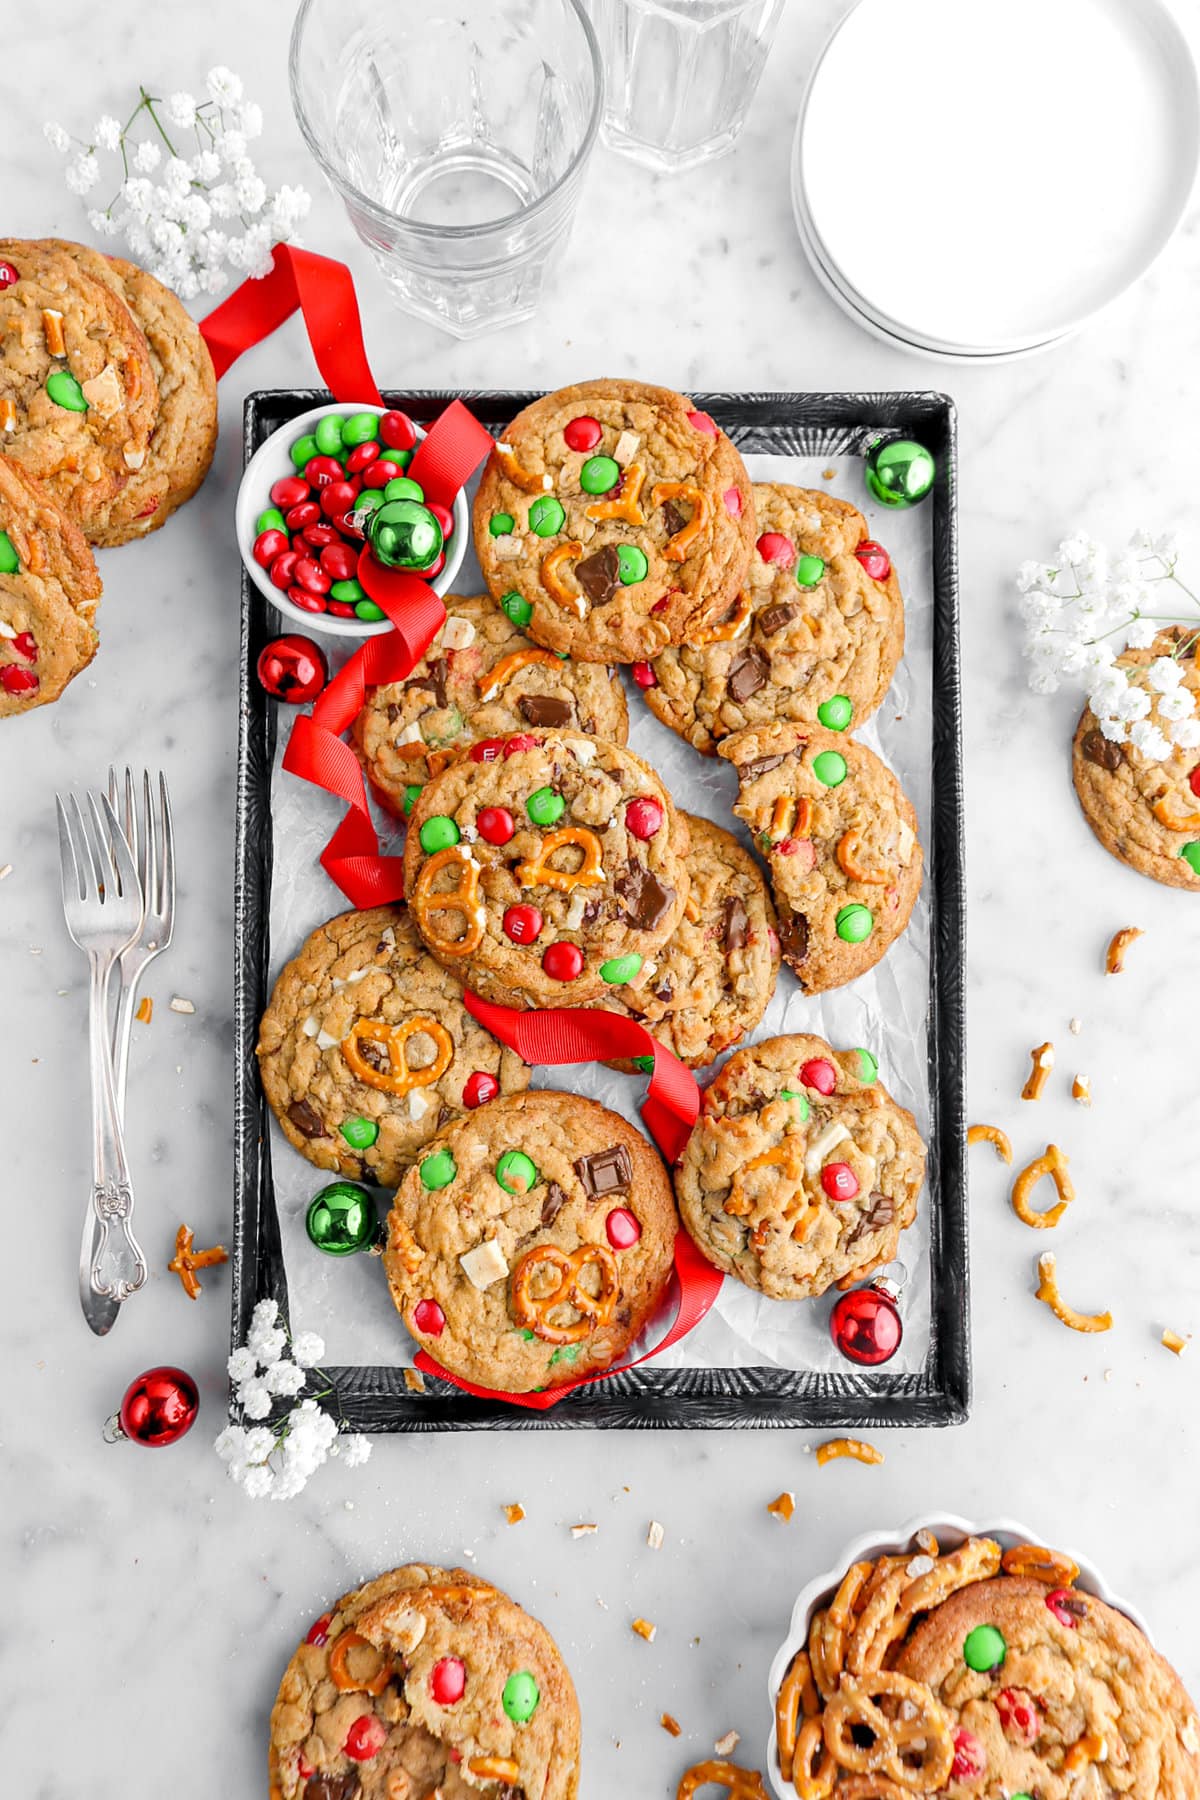 christmas monster cookies piled on lined sheet pan with red ribbon, red and green ornaments, and red and green M&M's in white bowl beside cookies with more cookies, white flowers, two forks, a plate, and a bowl of pretzels around on marble surface.